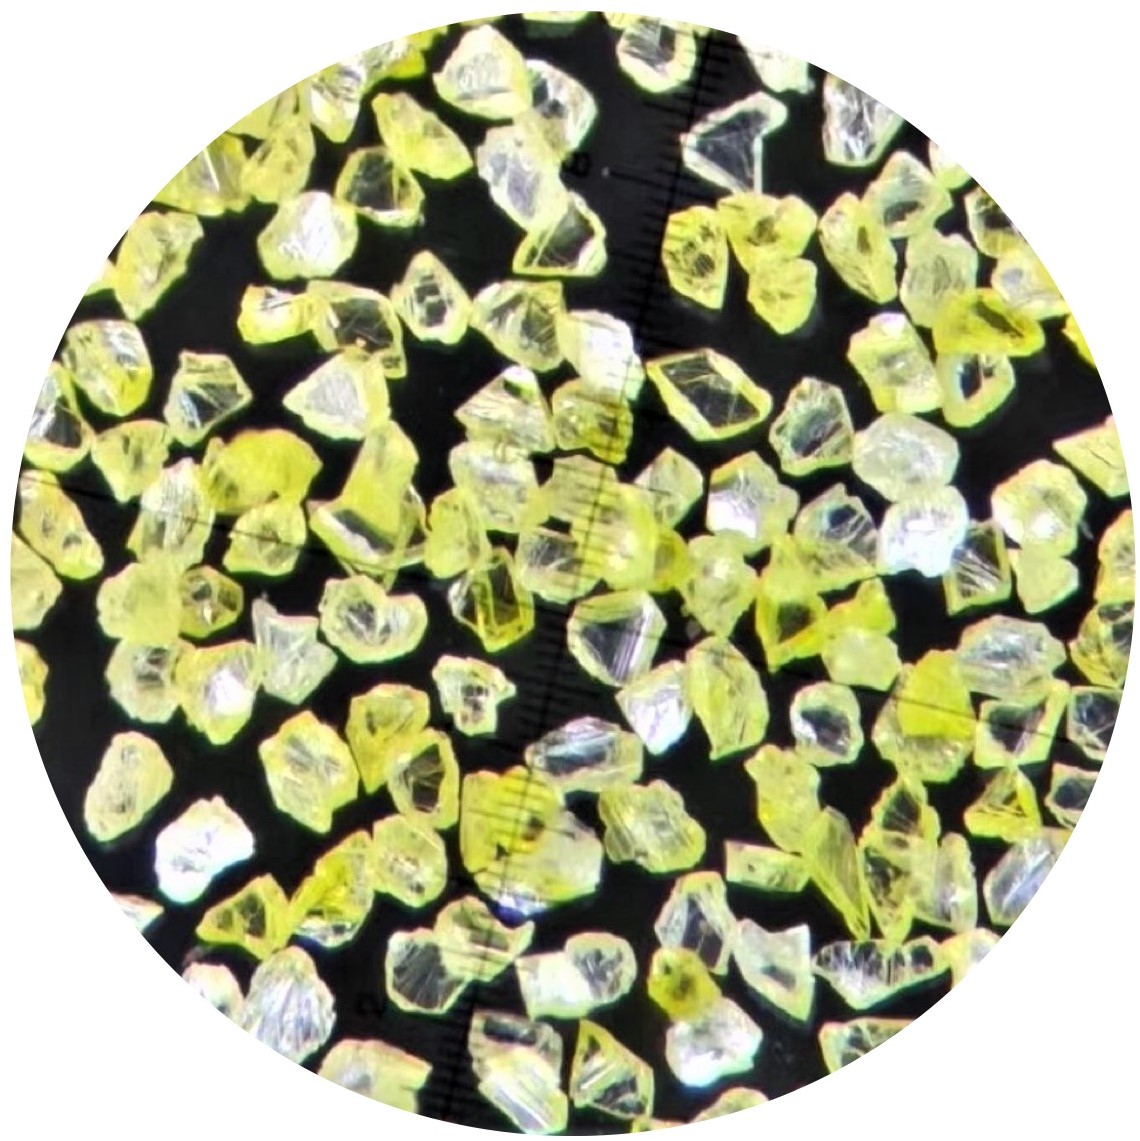 SND-G15 High Toughness Yellow RVD Curshed Synthetic Diamond Powder Featured Image